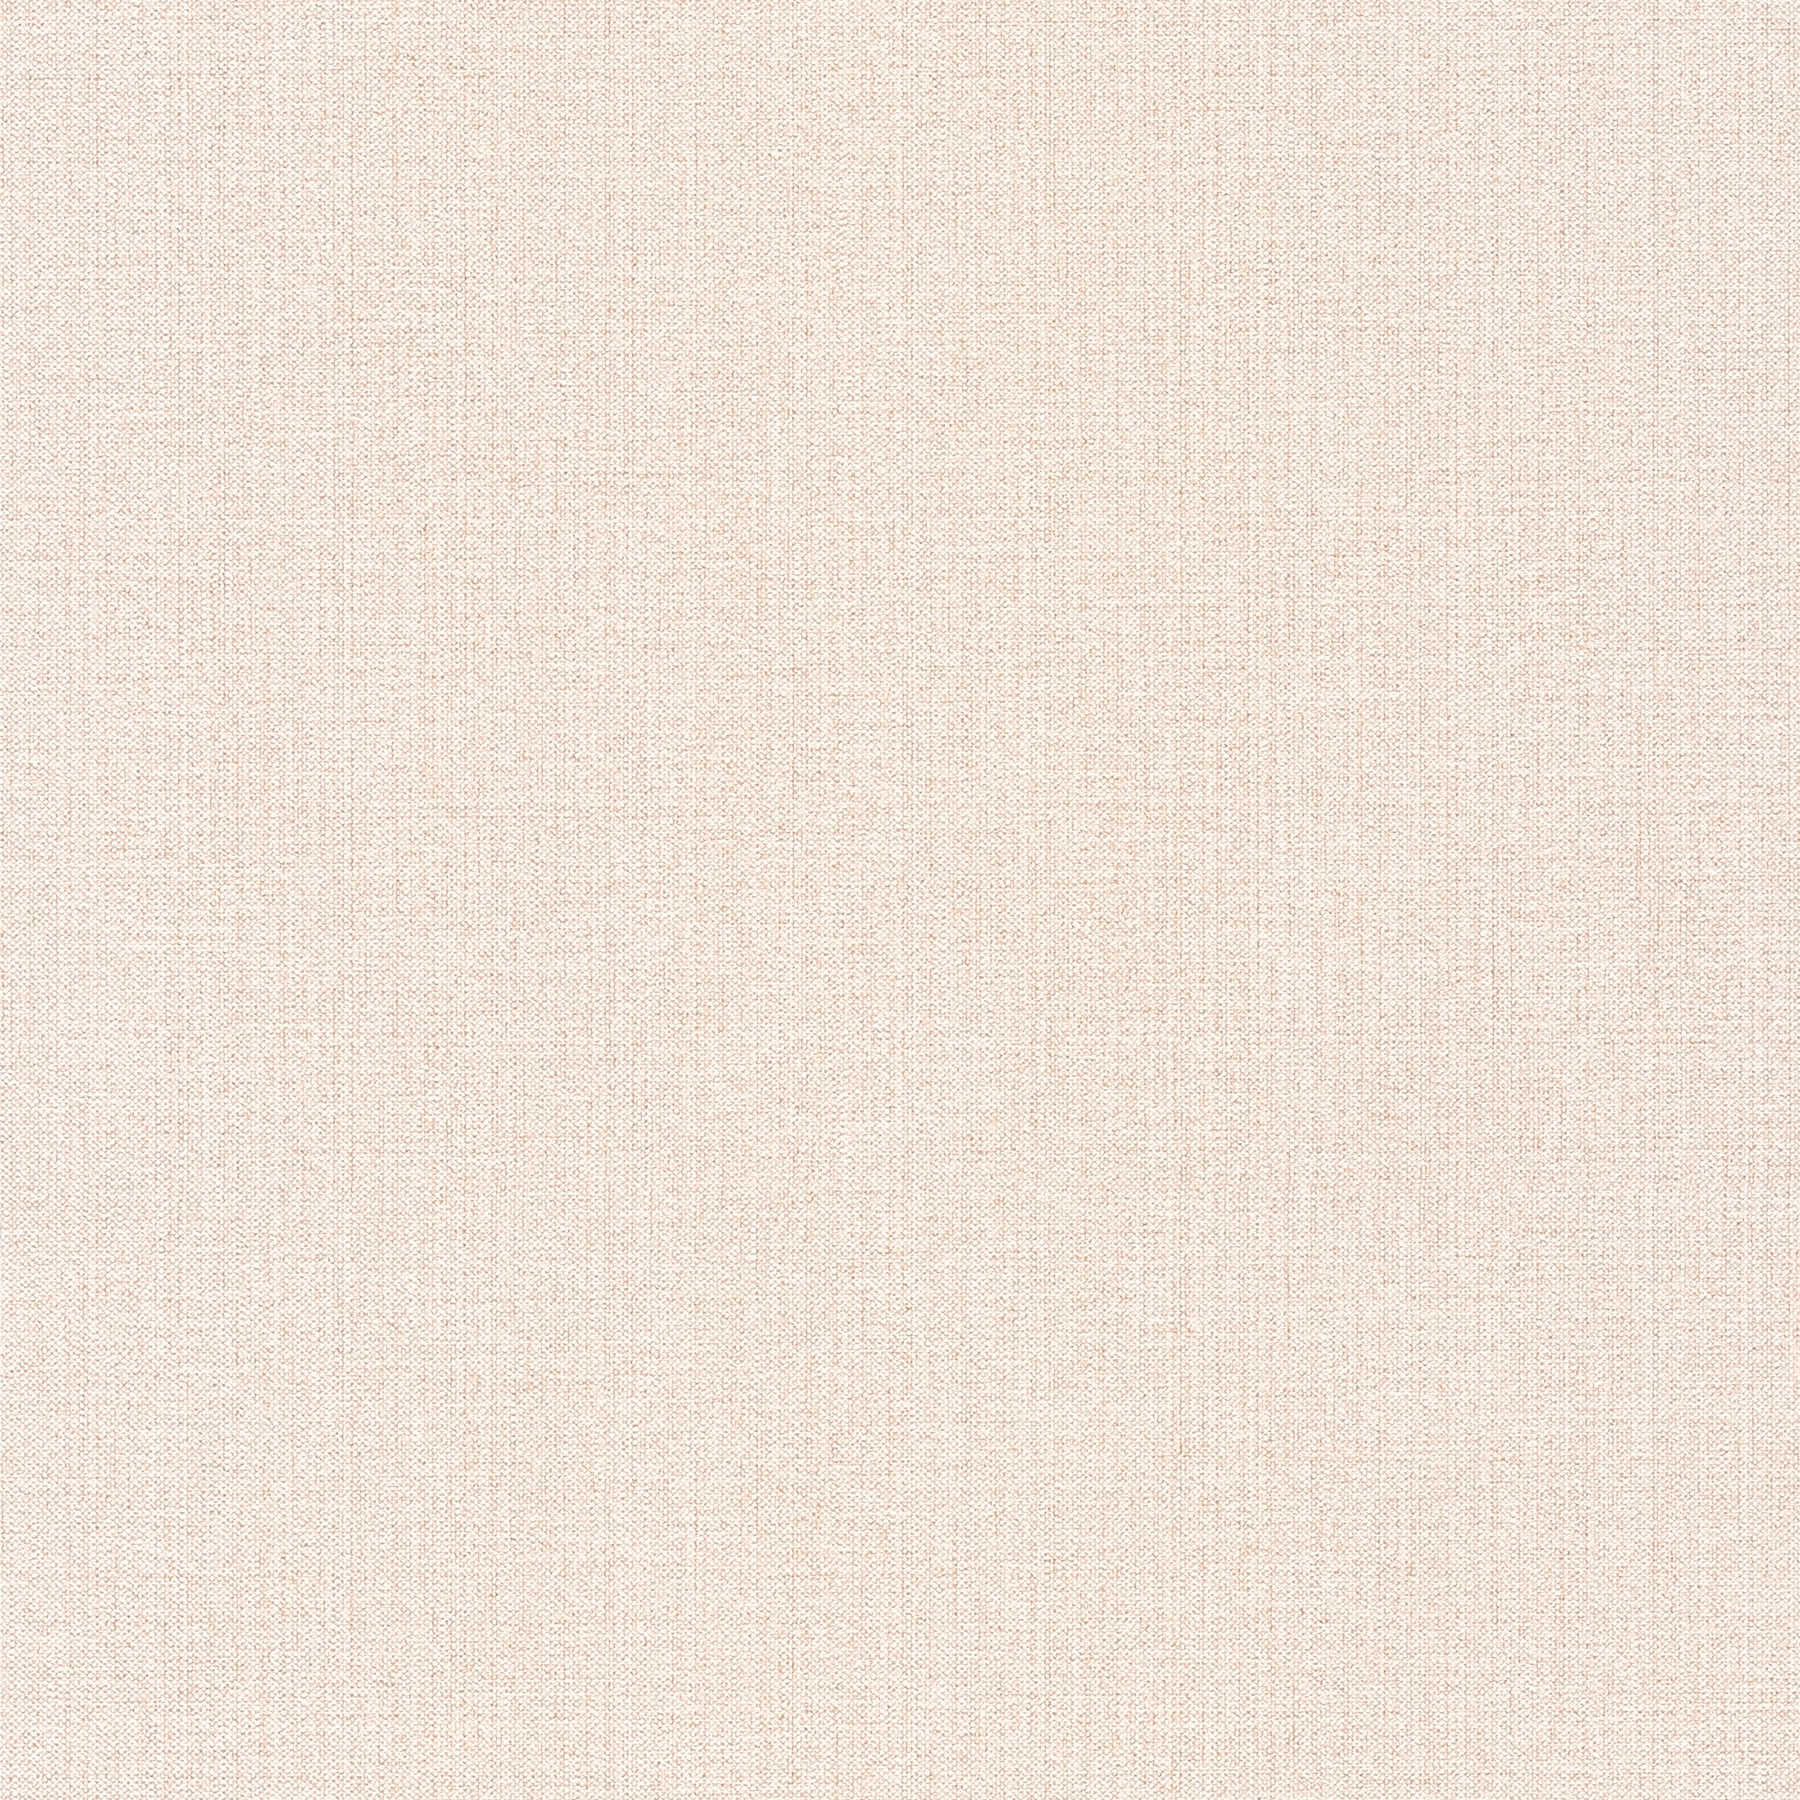 Country house wallpaper with linen look & texture pattern - beige
